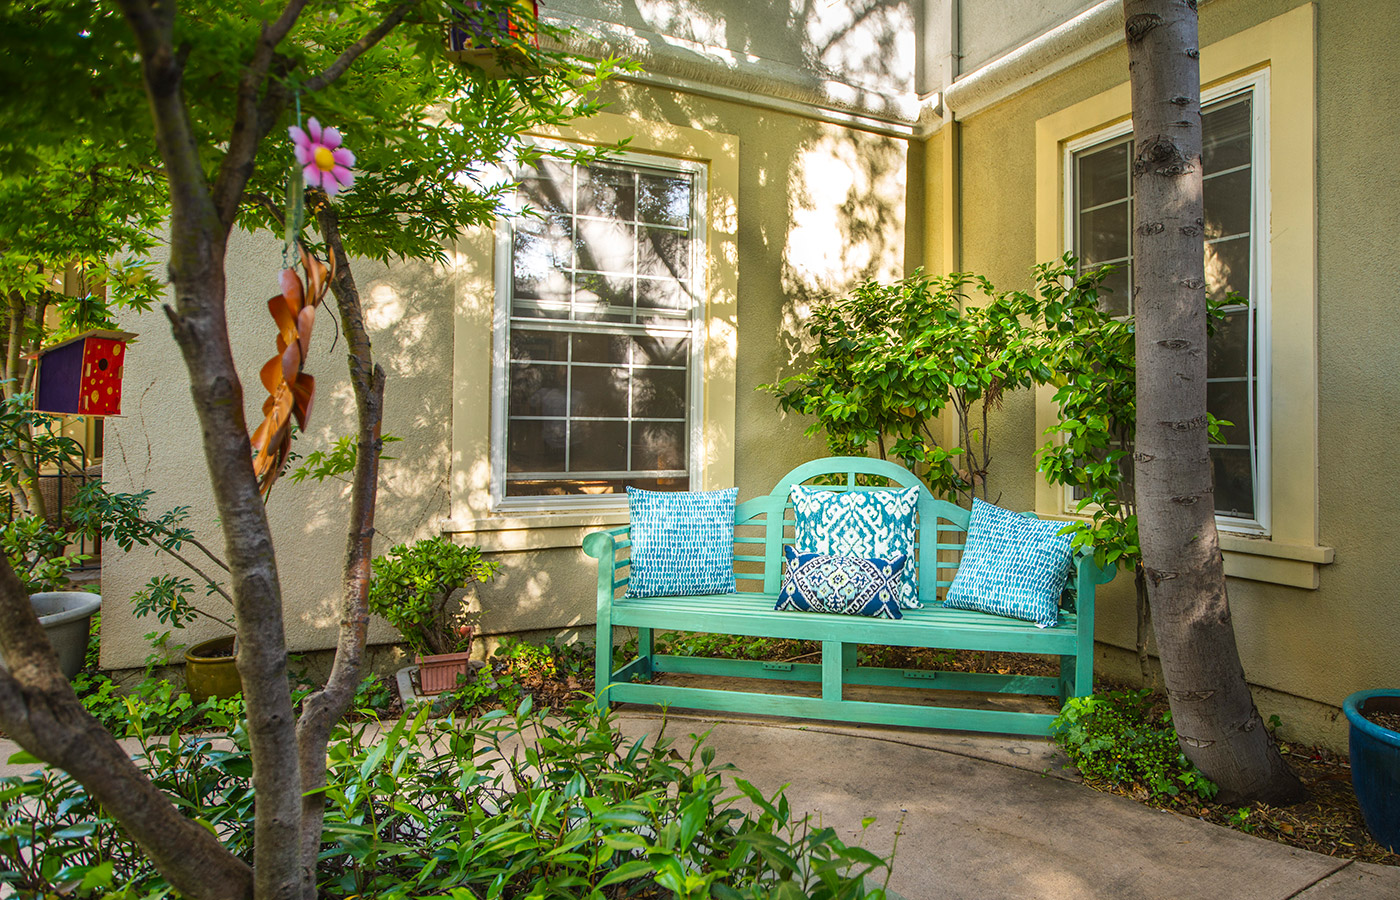 A turquoise bench in the garden